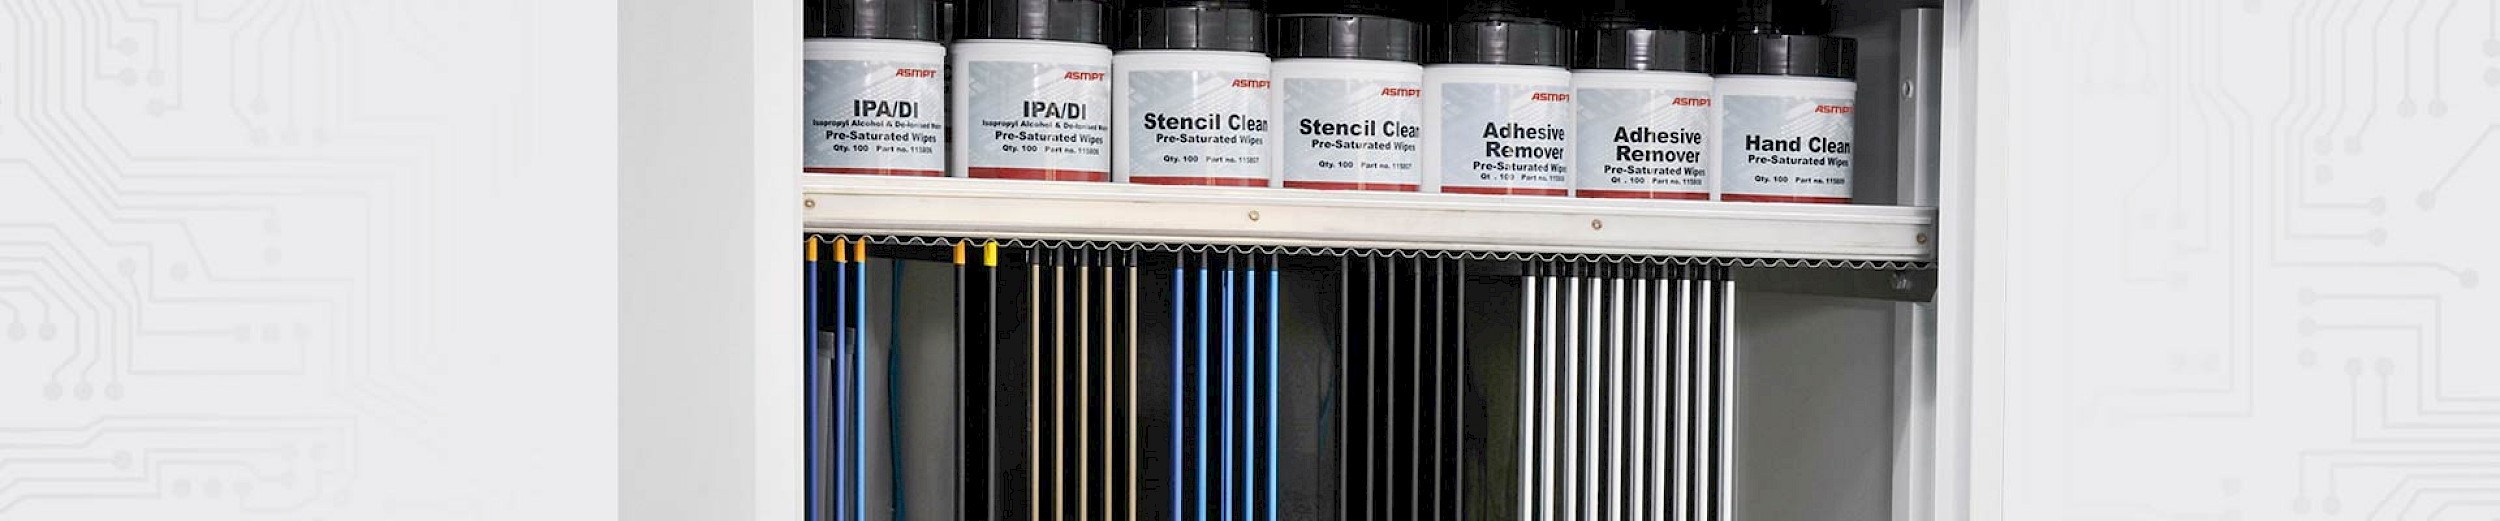 Process Support Products- Stencil Storage Solutions